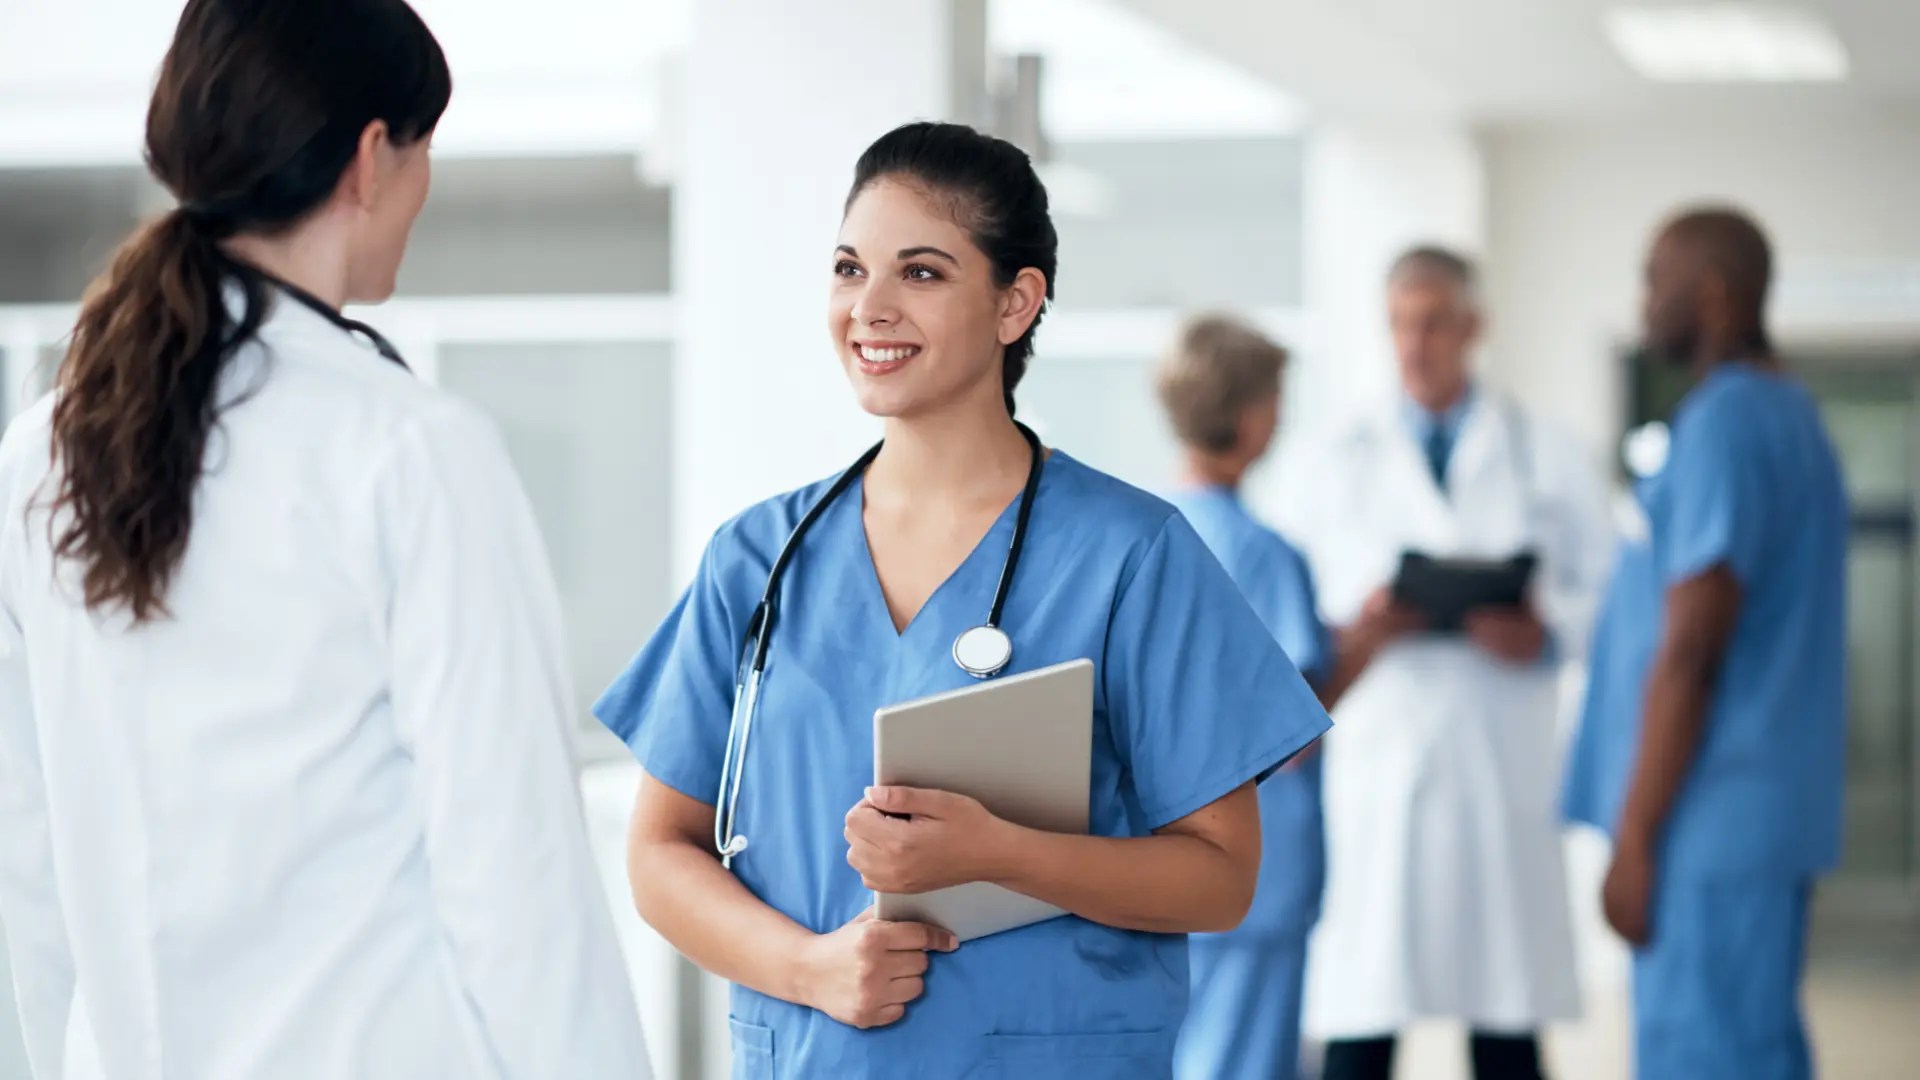 What are clinical rotations? | MUA